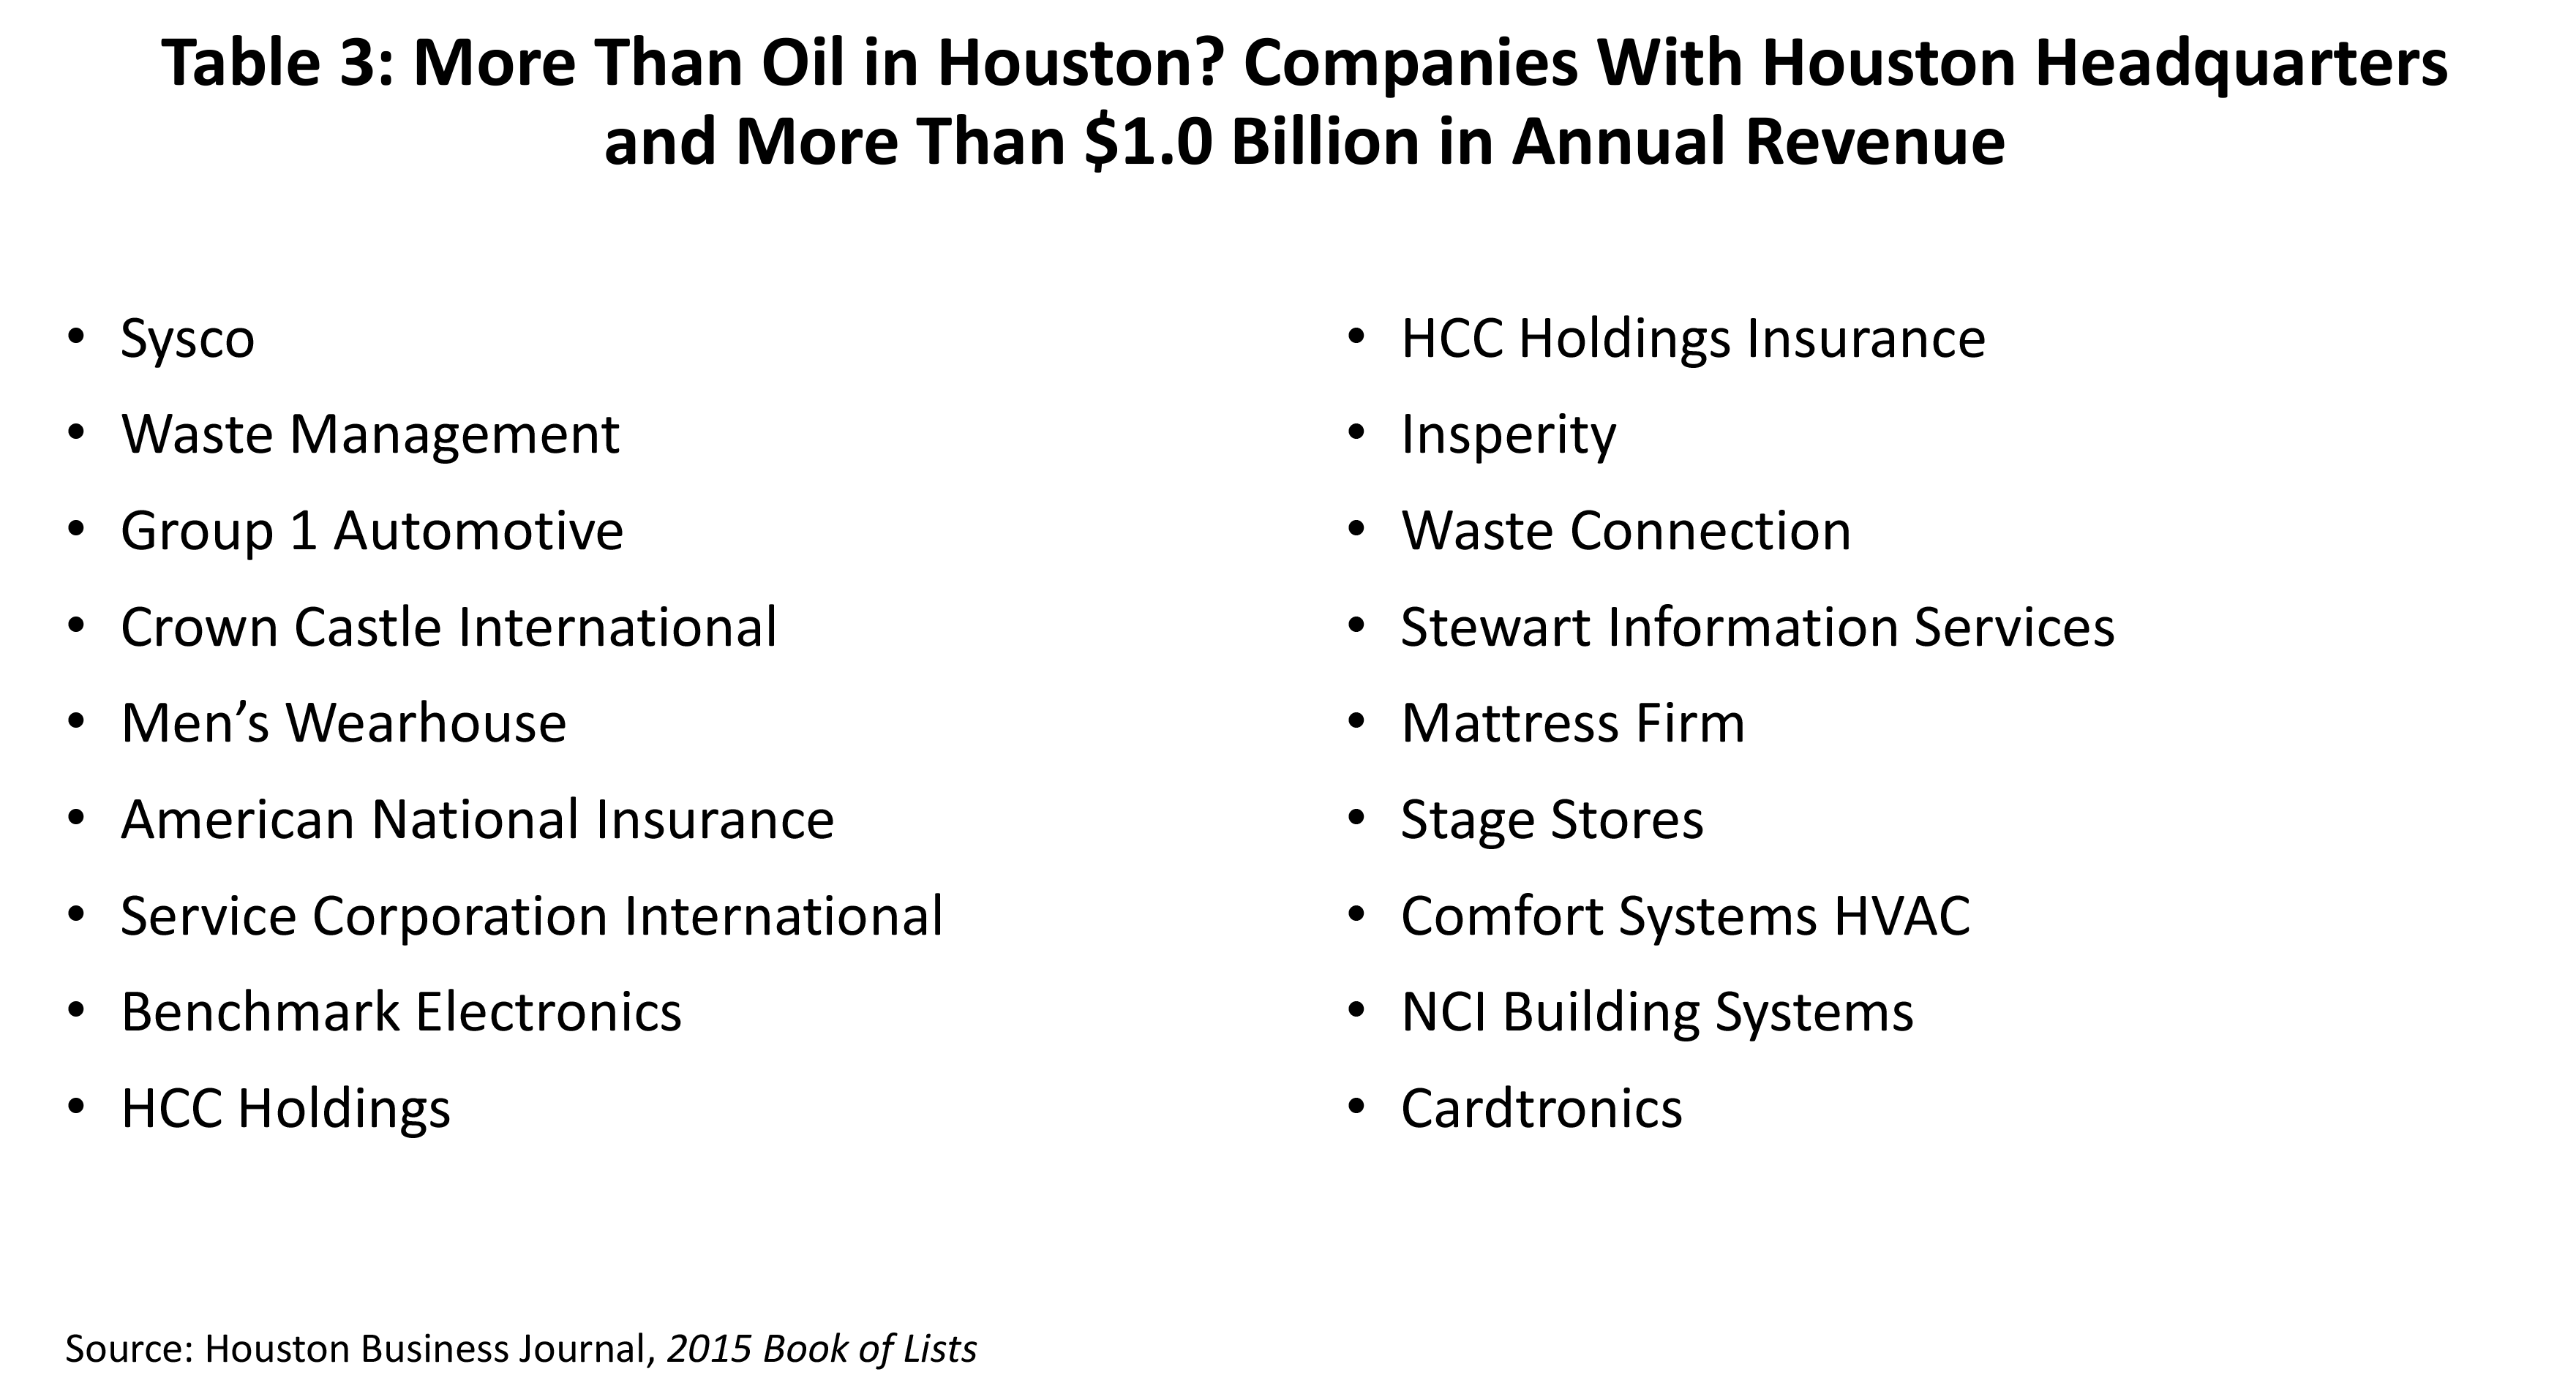 Table 3. More Than Oil in Houston? Companies With Houston Headquarters and More Than $1.0 Billion in Annual Revenue.